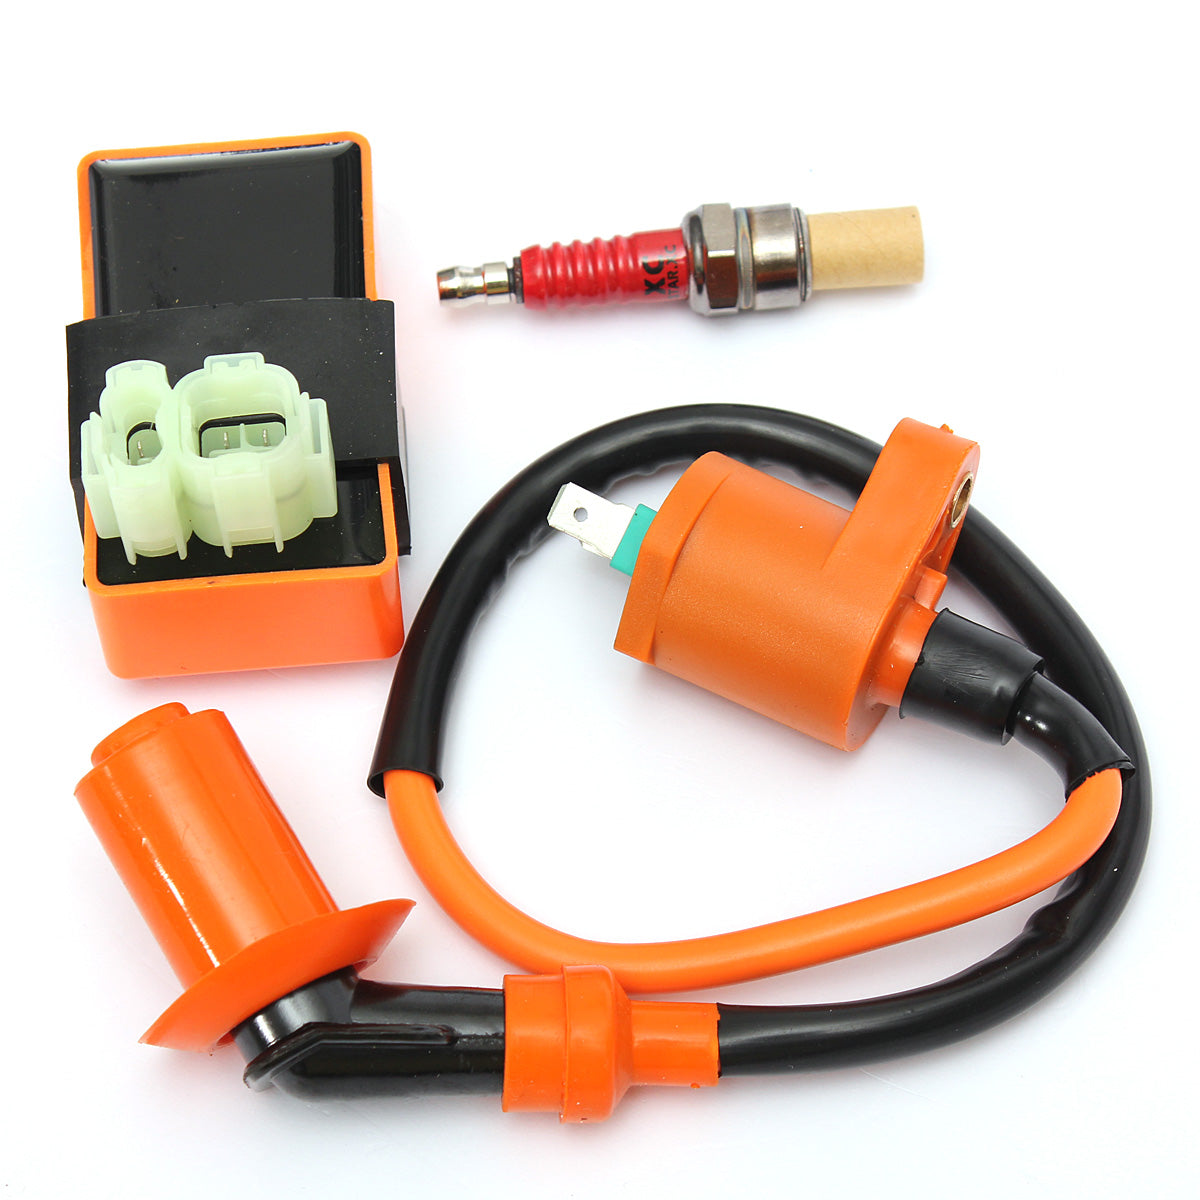 Coral Ignition Coil+Racing CDI Box+ Spark Plug For GY6 50 125 150cc Moped Scooter ATV Go Carts